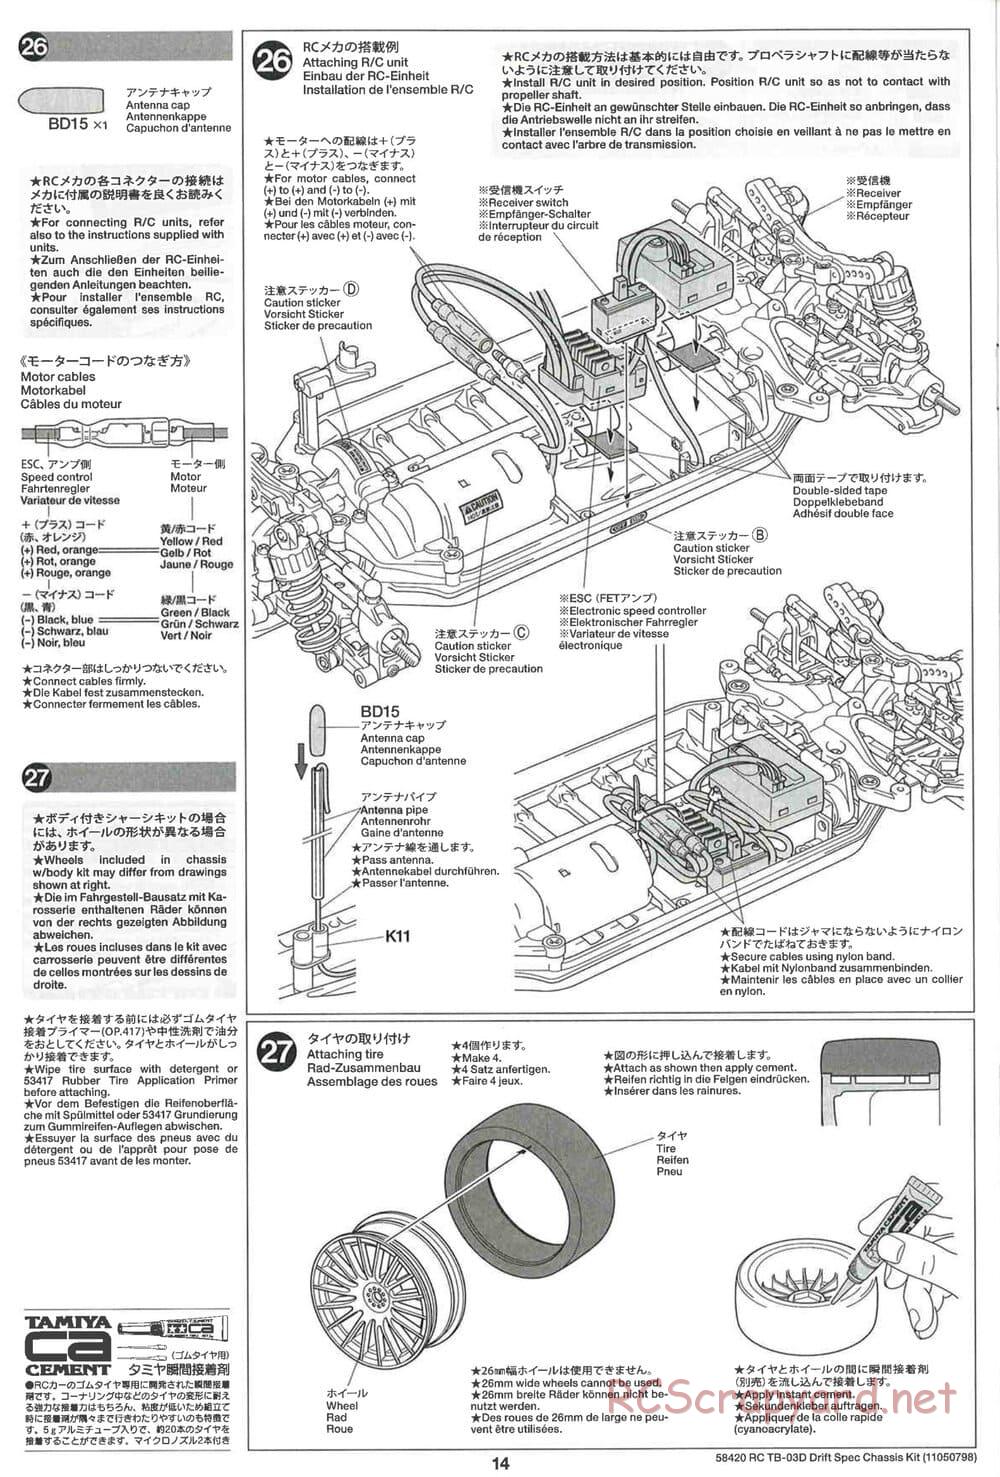 Tamiya - TB-03D HP Drift Spec Chassis - Manual - Page 14